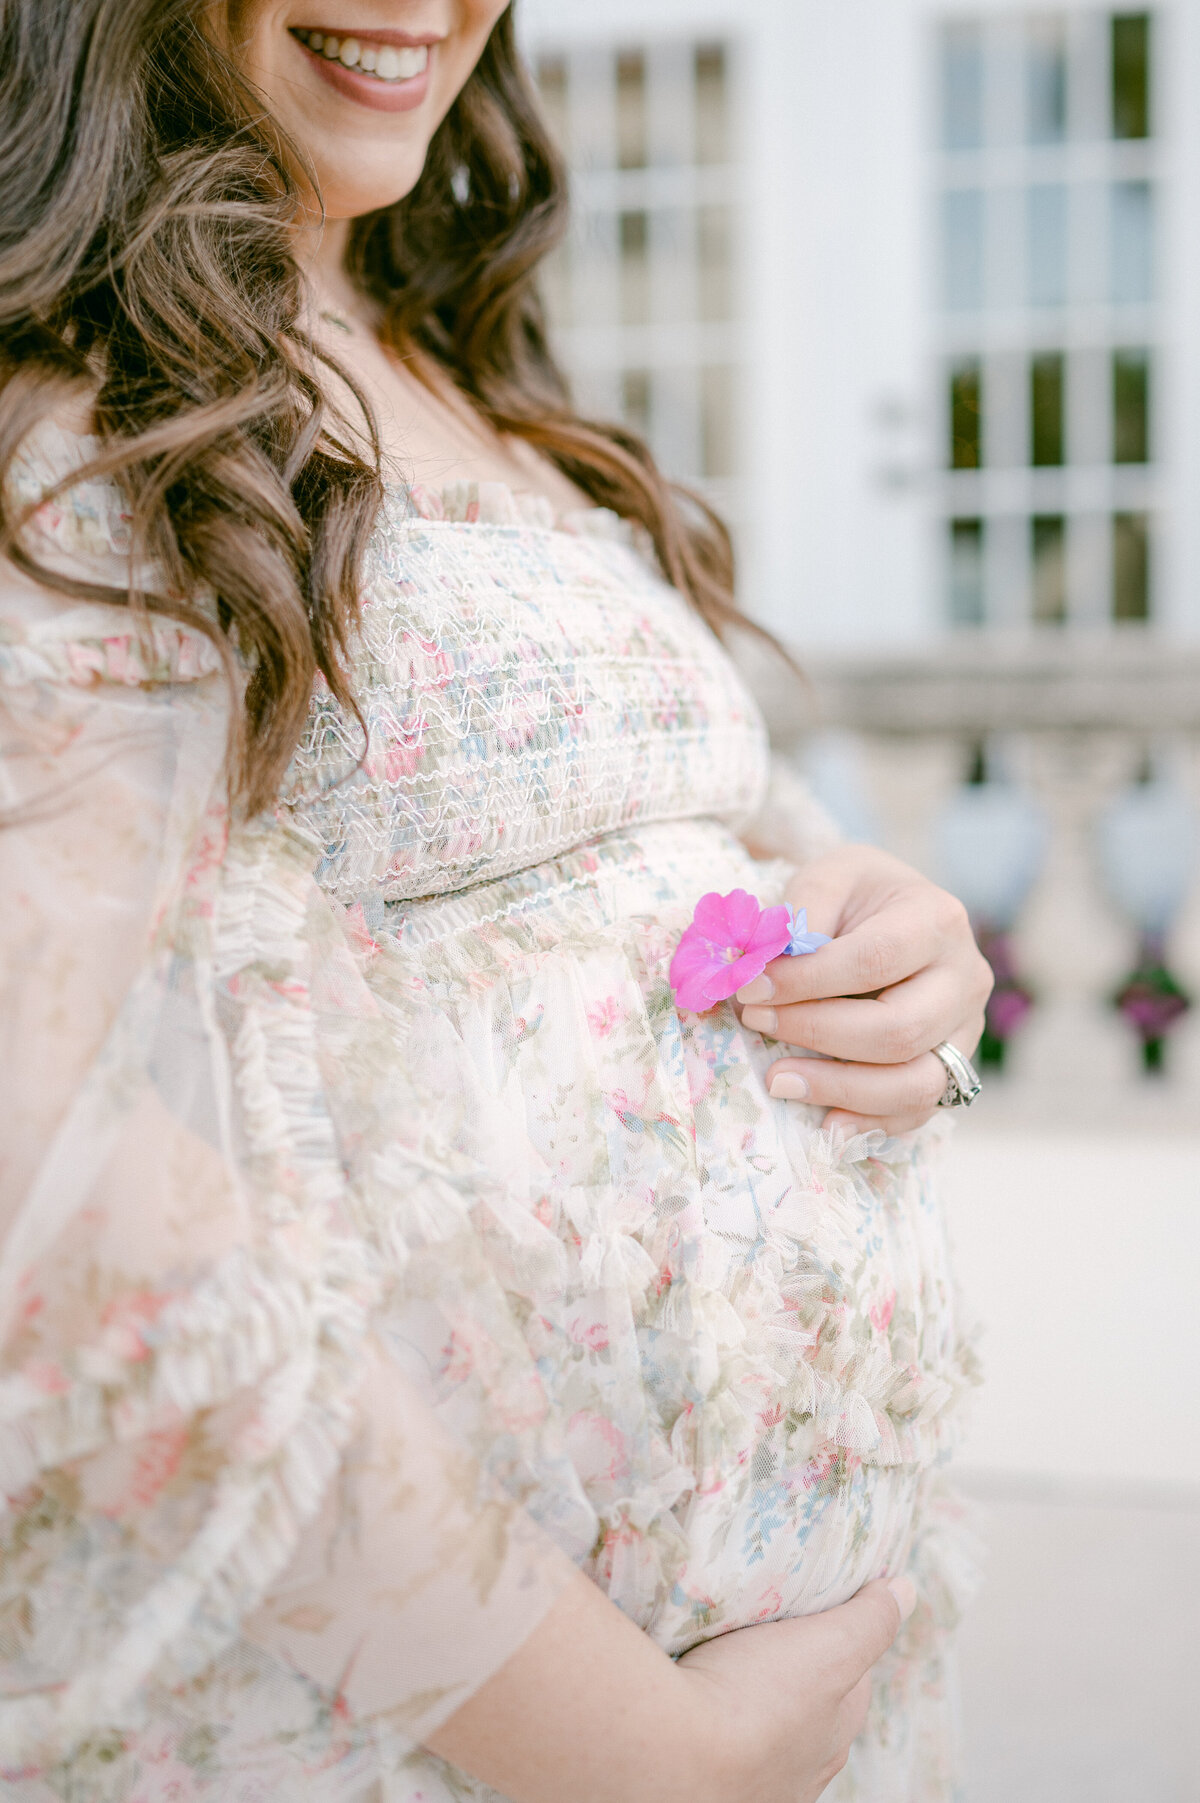 Details baby bump with flower